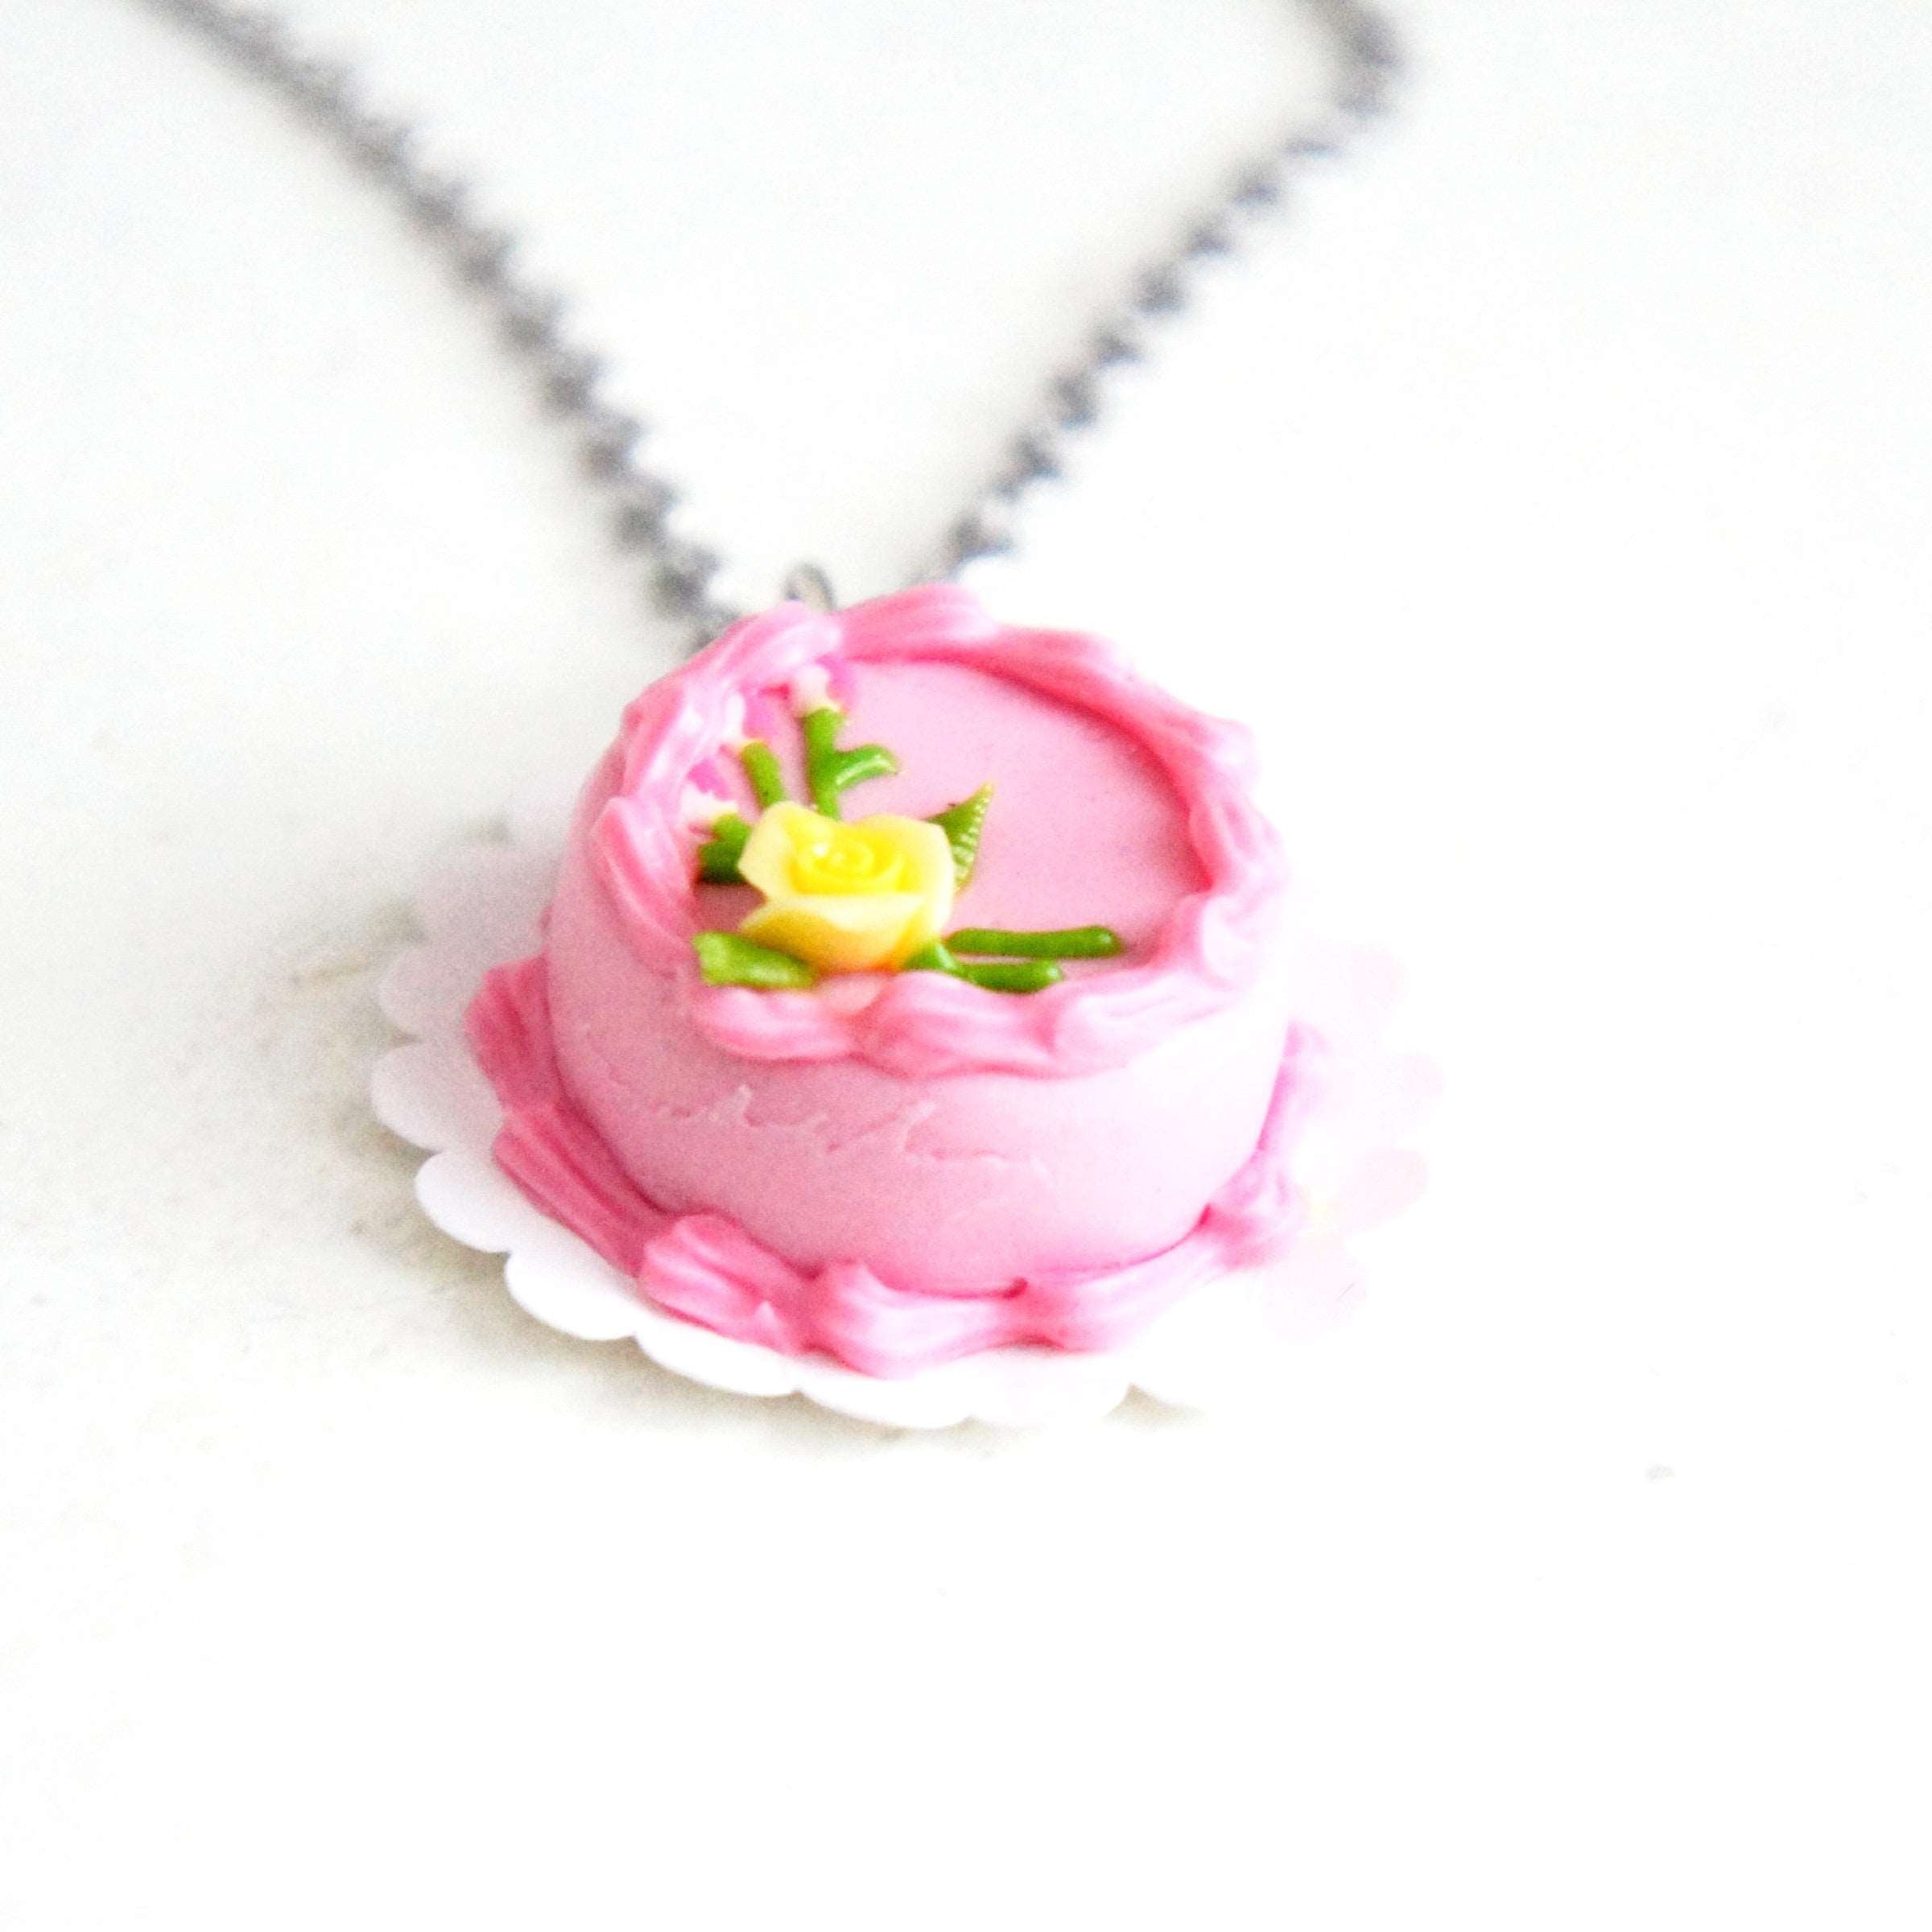 Celebration Cake Necklace - Jillicious charms and accessories